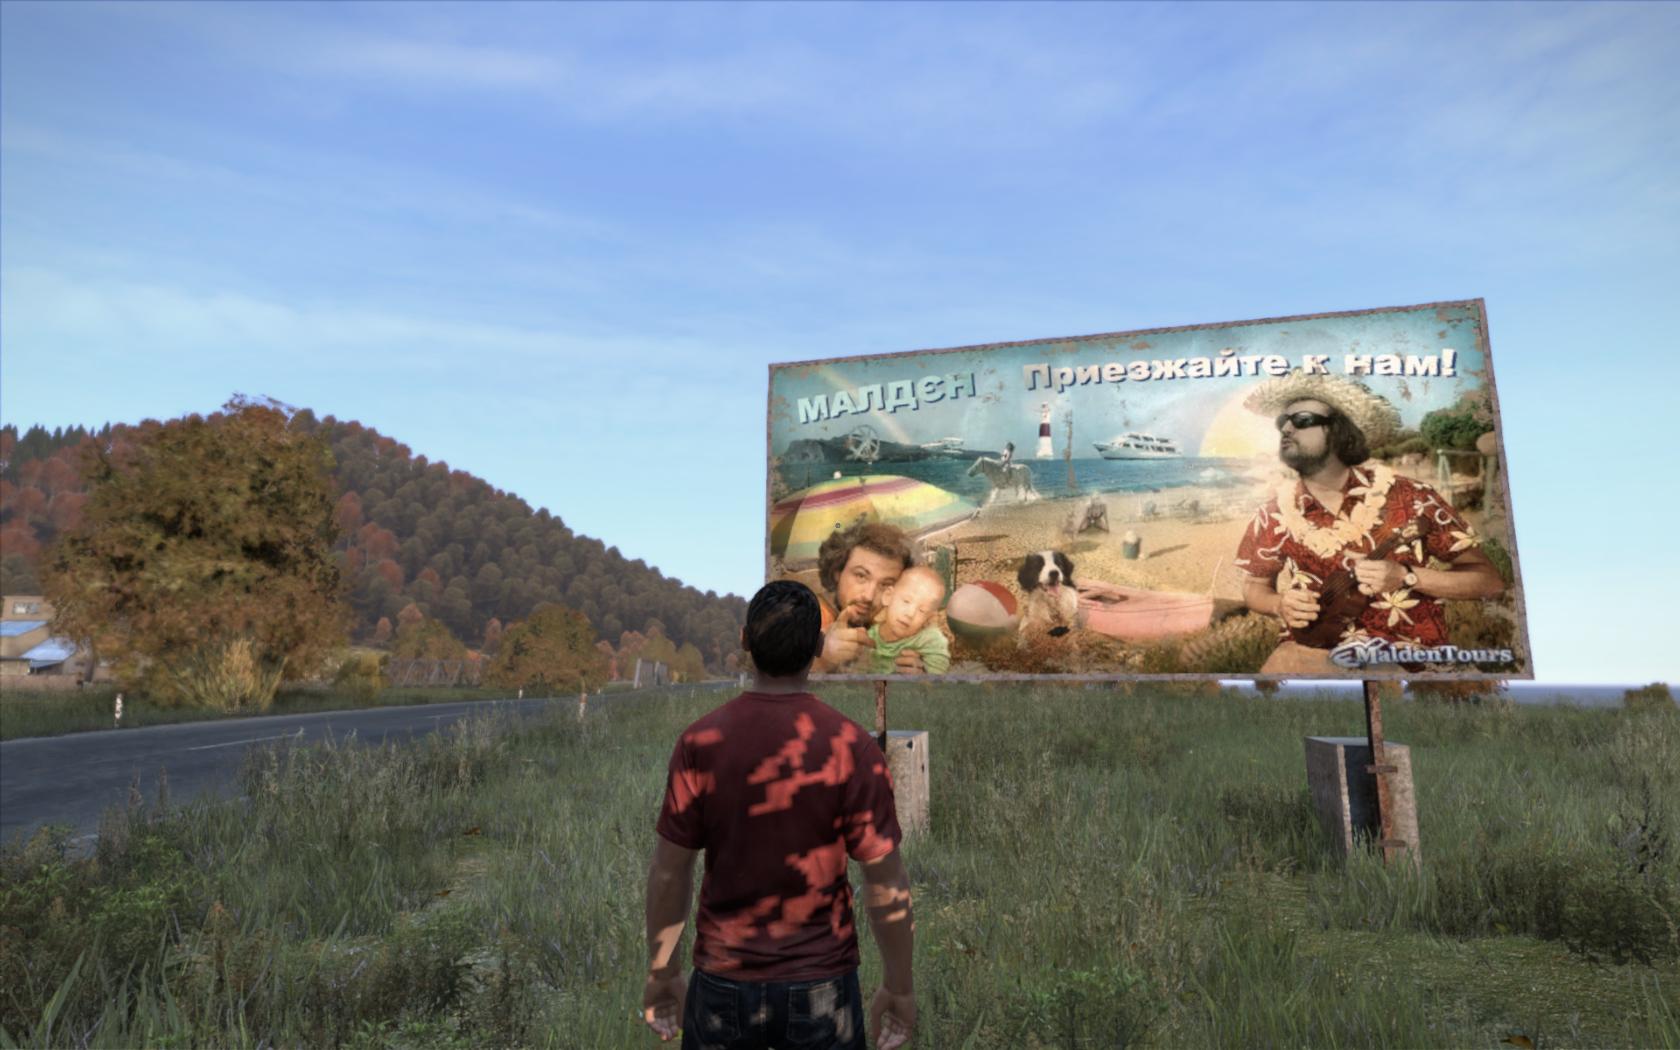 The Stupid Vacation Company I Was With (Their Advertisement) in DayZ